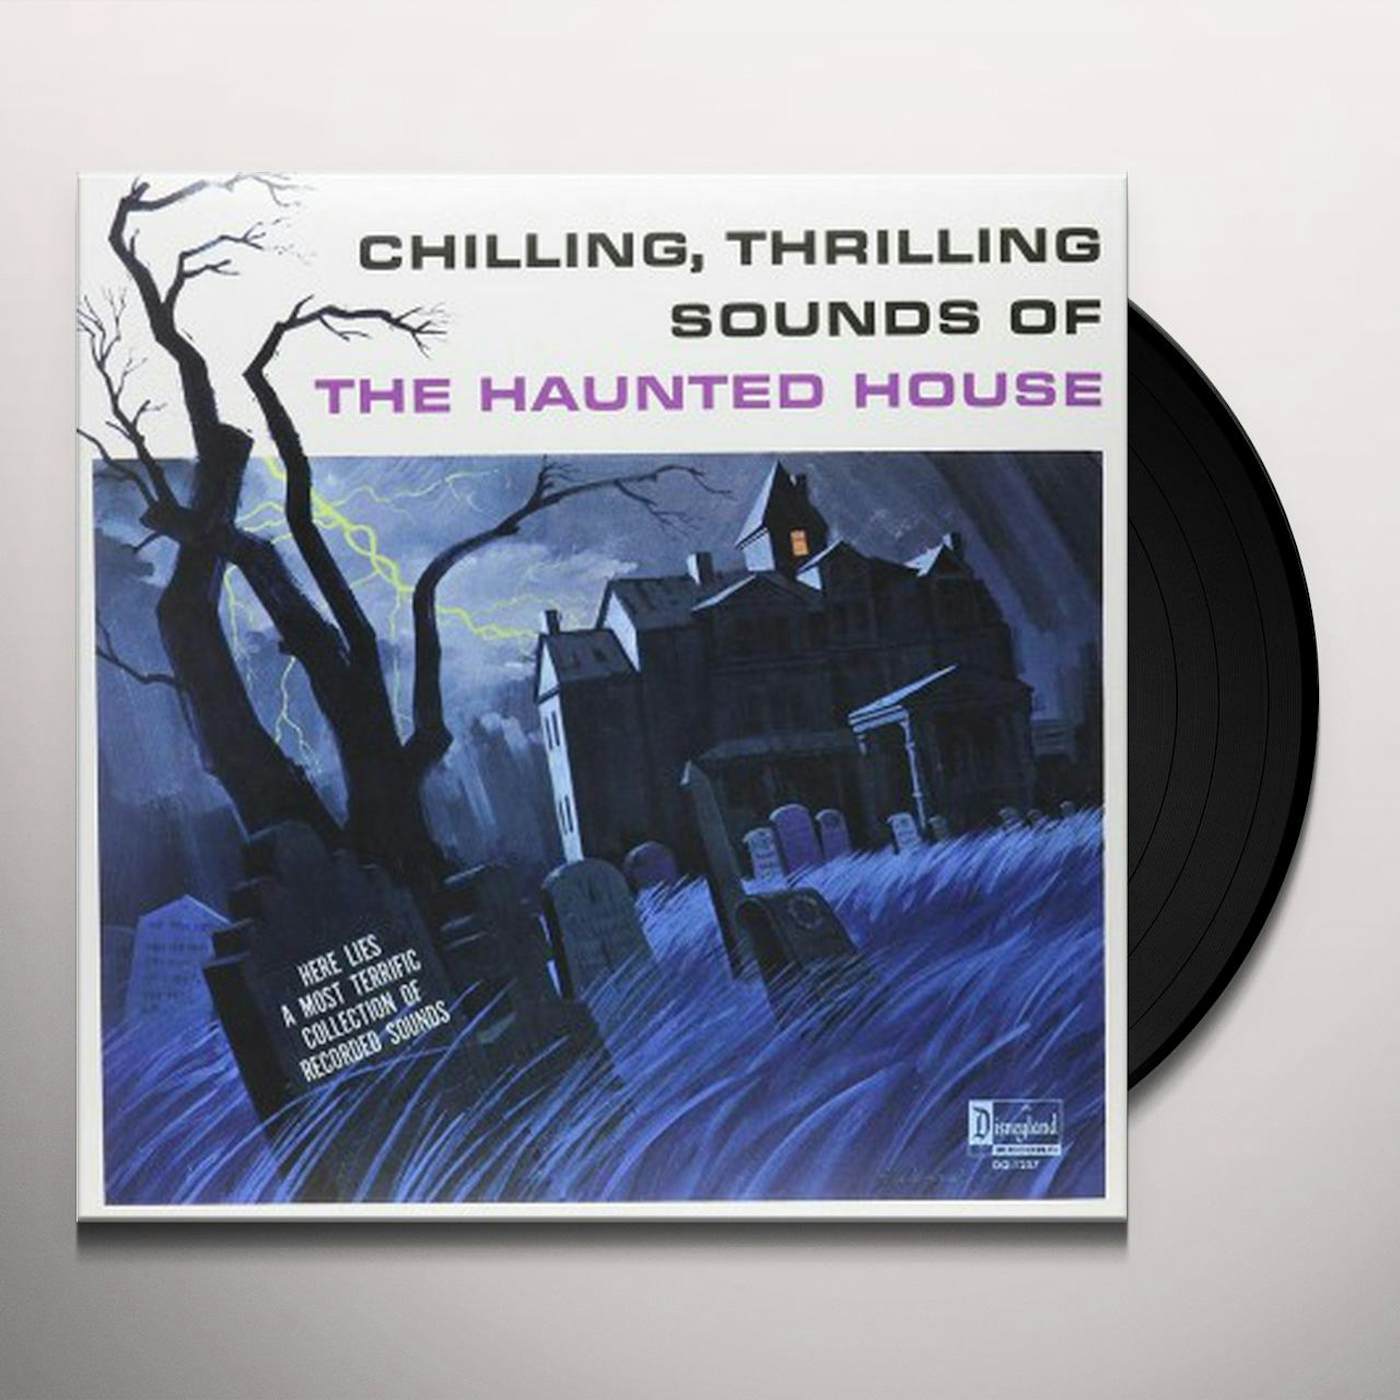 New Chilling, Thrilling Sounds of the Haunted House